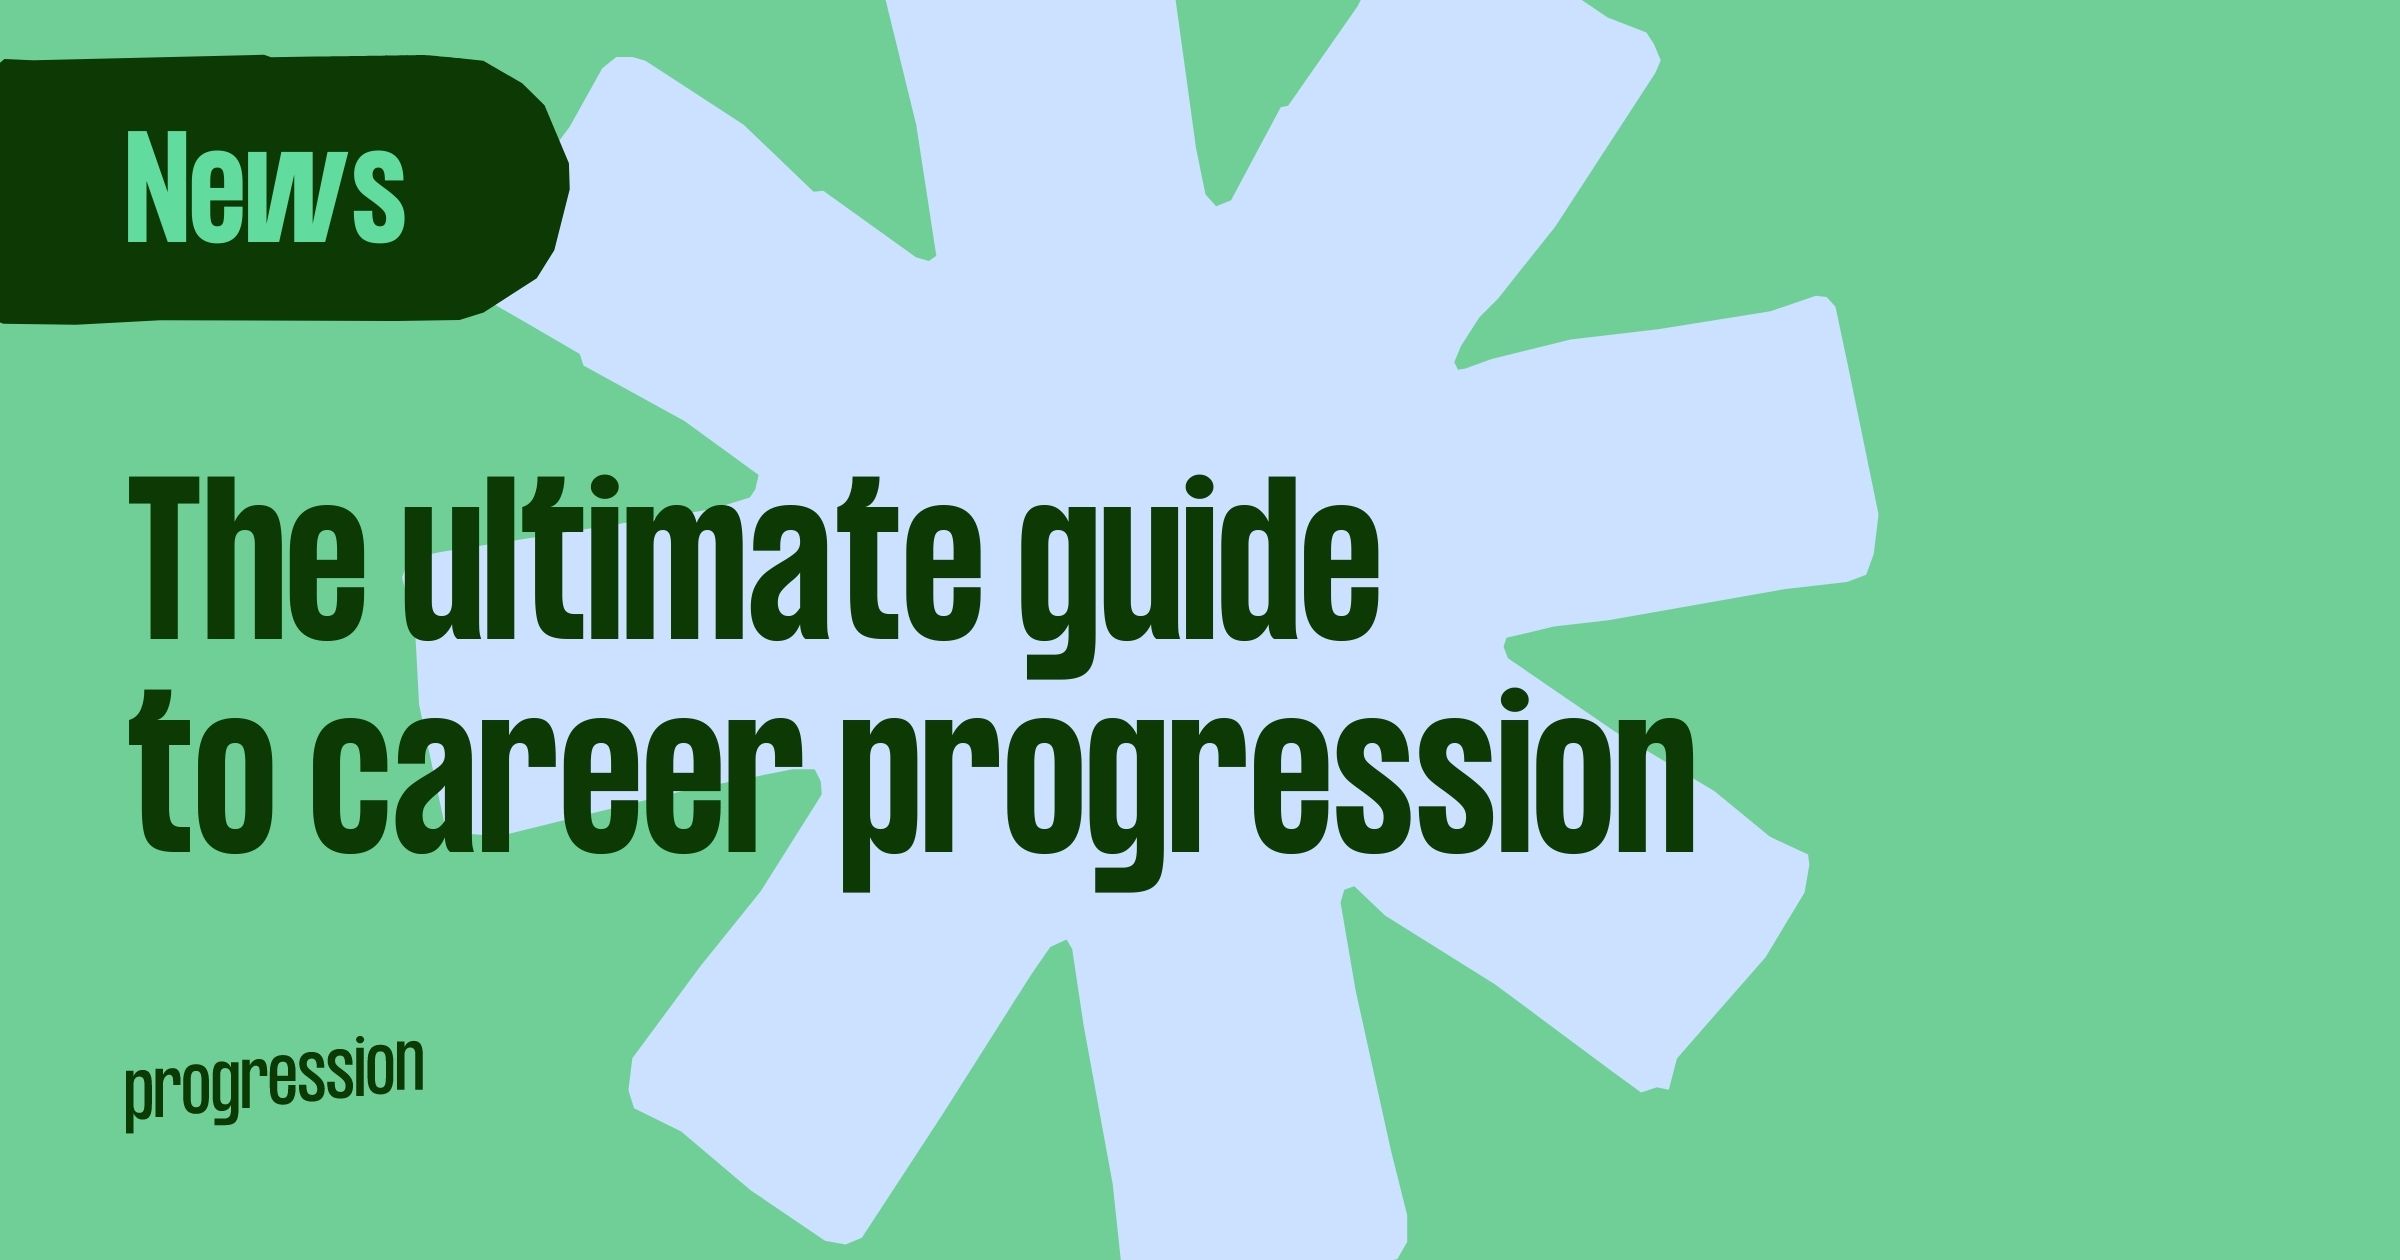 The ultimate guide to career progression